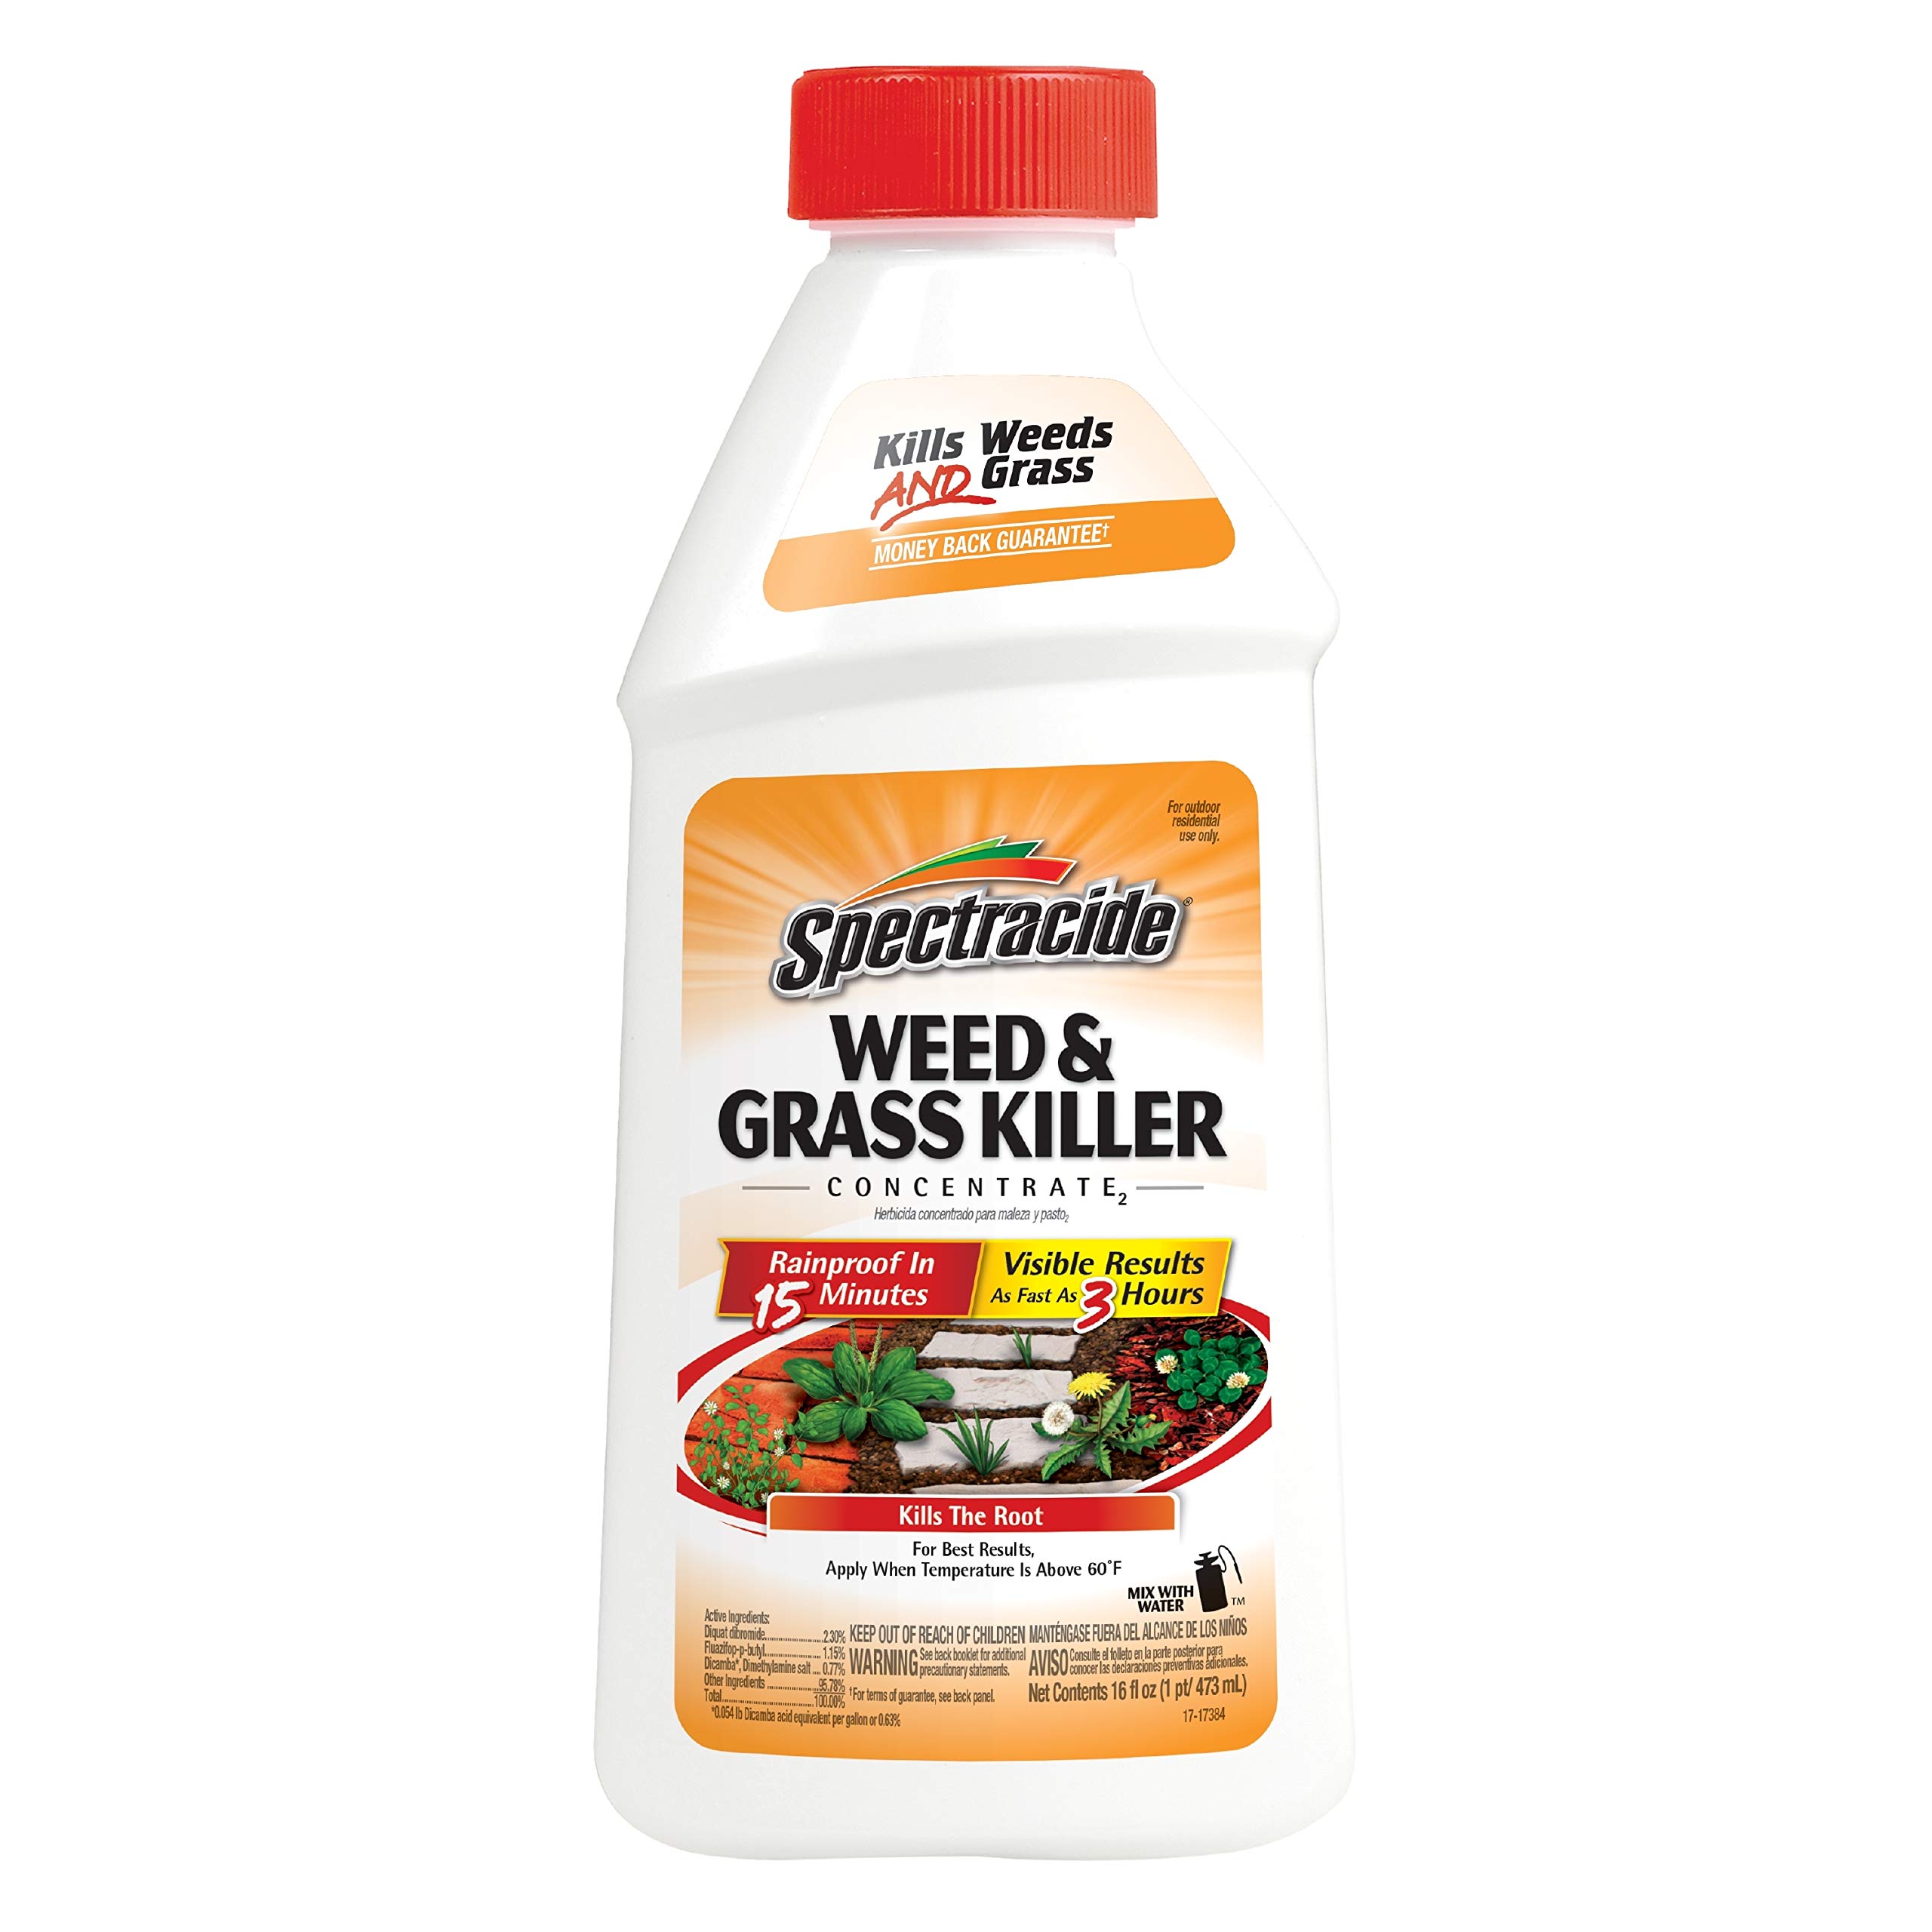 16-Oz Spectracide Weed & Grass Killer Concentrate $2.52 + Free Shipping w/ Prime or on orders over $35